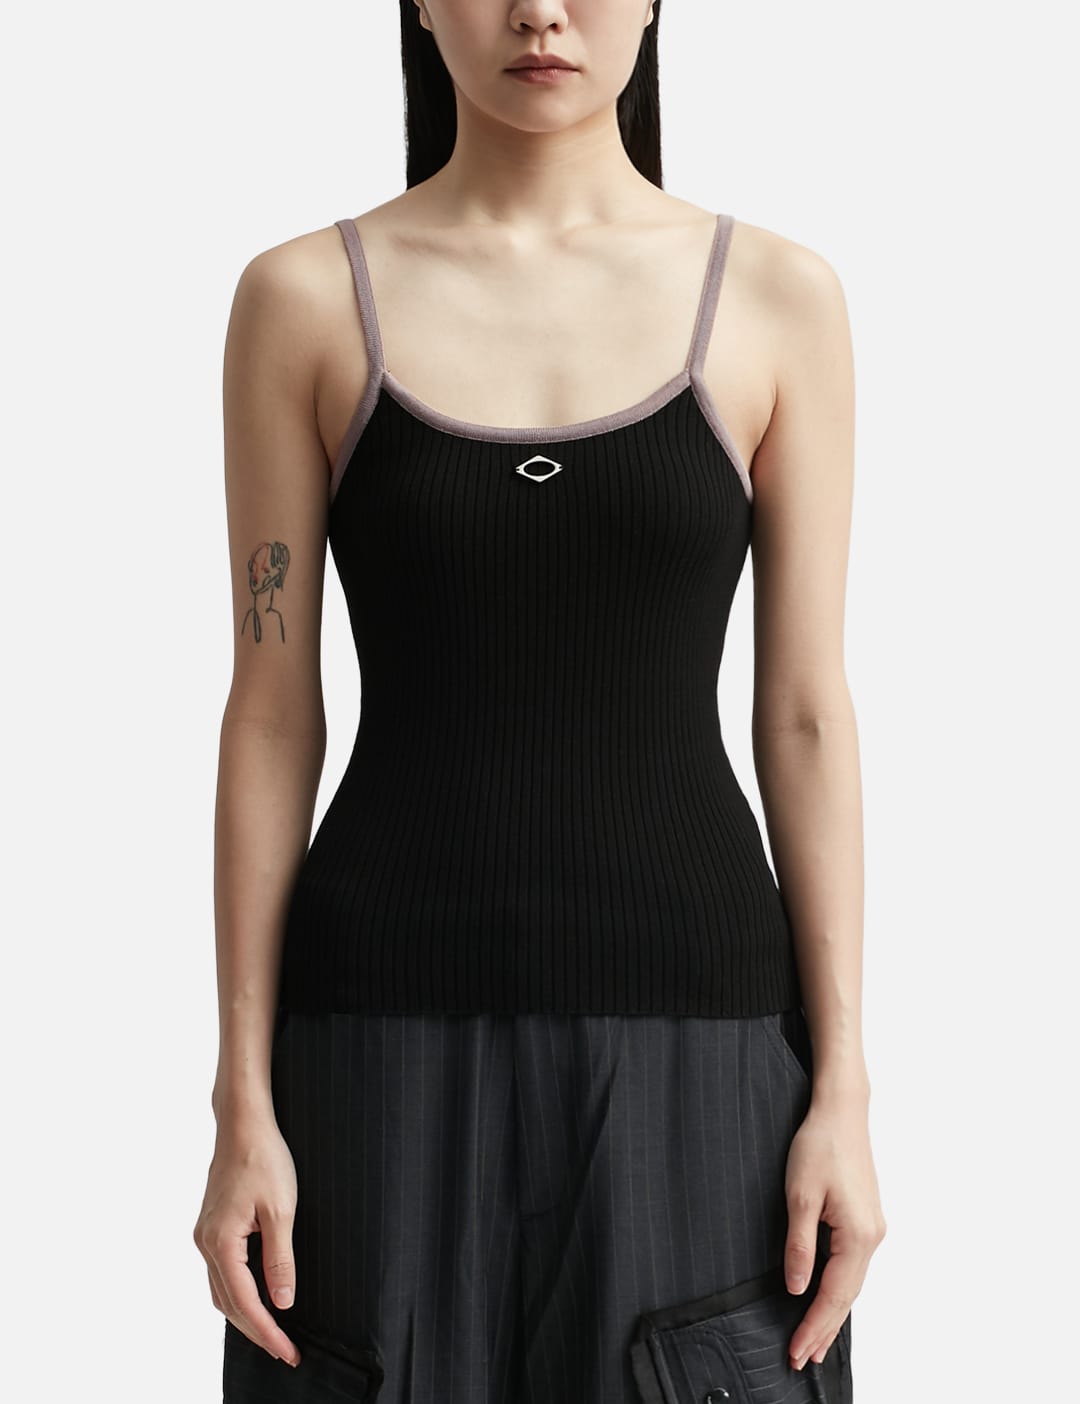 MISCHIEF - RHOMBUS KNIT CAMISOLE | HBX - Globally Curated Fashion